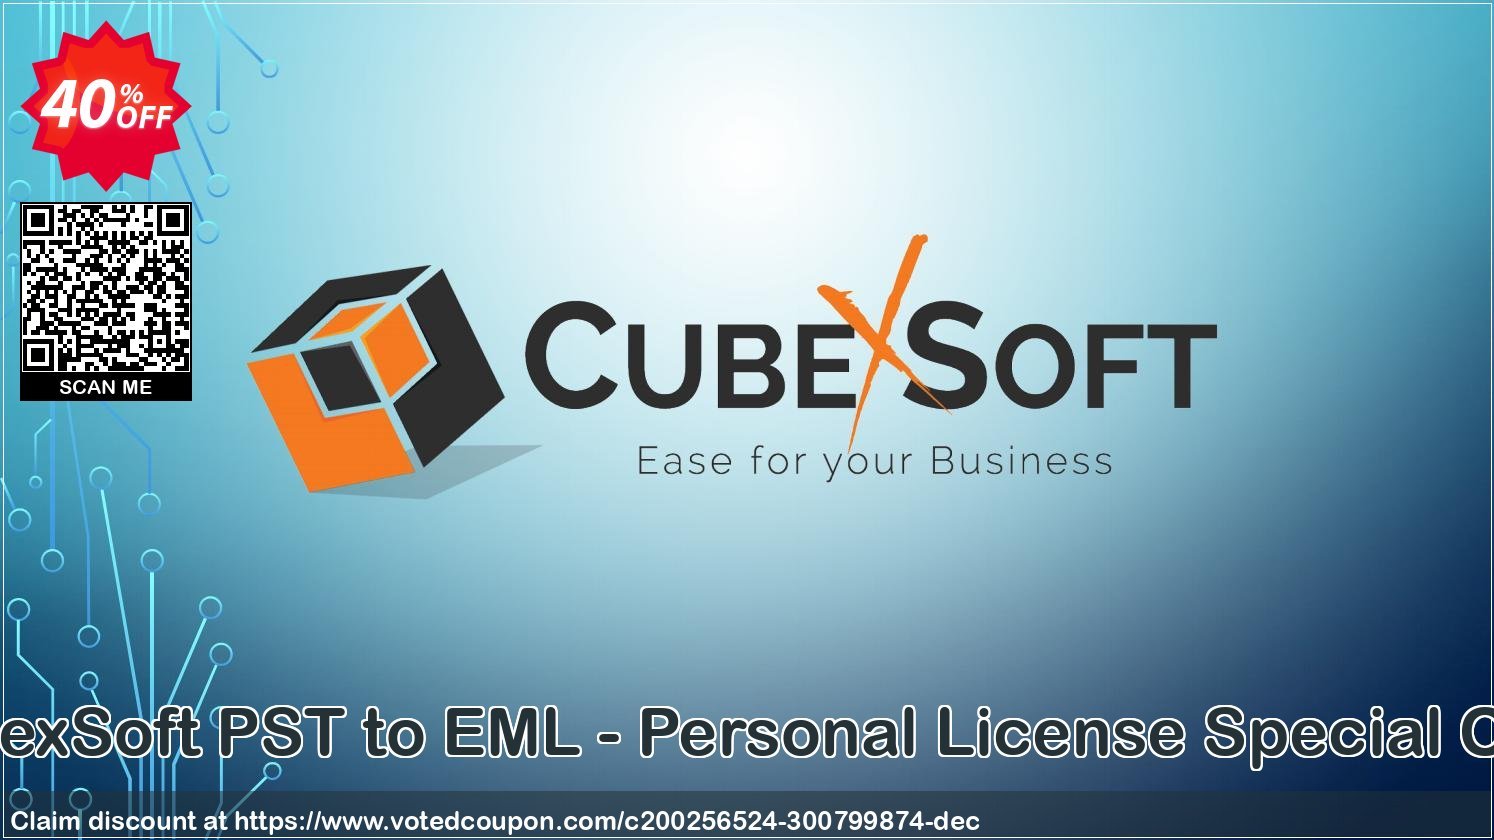 CubexSoft PST to EML - Personal Plan Special Offer Coupon, discount Coupon code CubexSoft PST to EML - Personal License Special Offer. Promotion: CubexSoft PST to EML - Personal License Special Offer offer from CubexSoft Tools Pvt. Ltd.